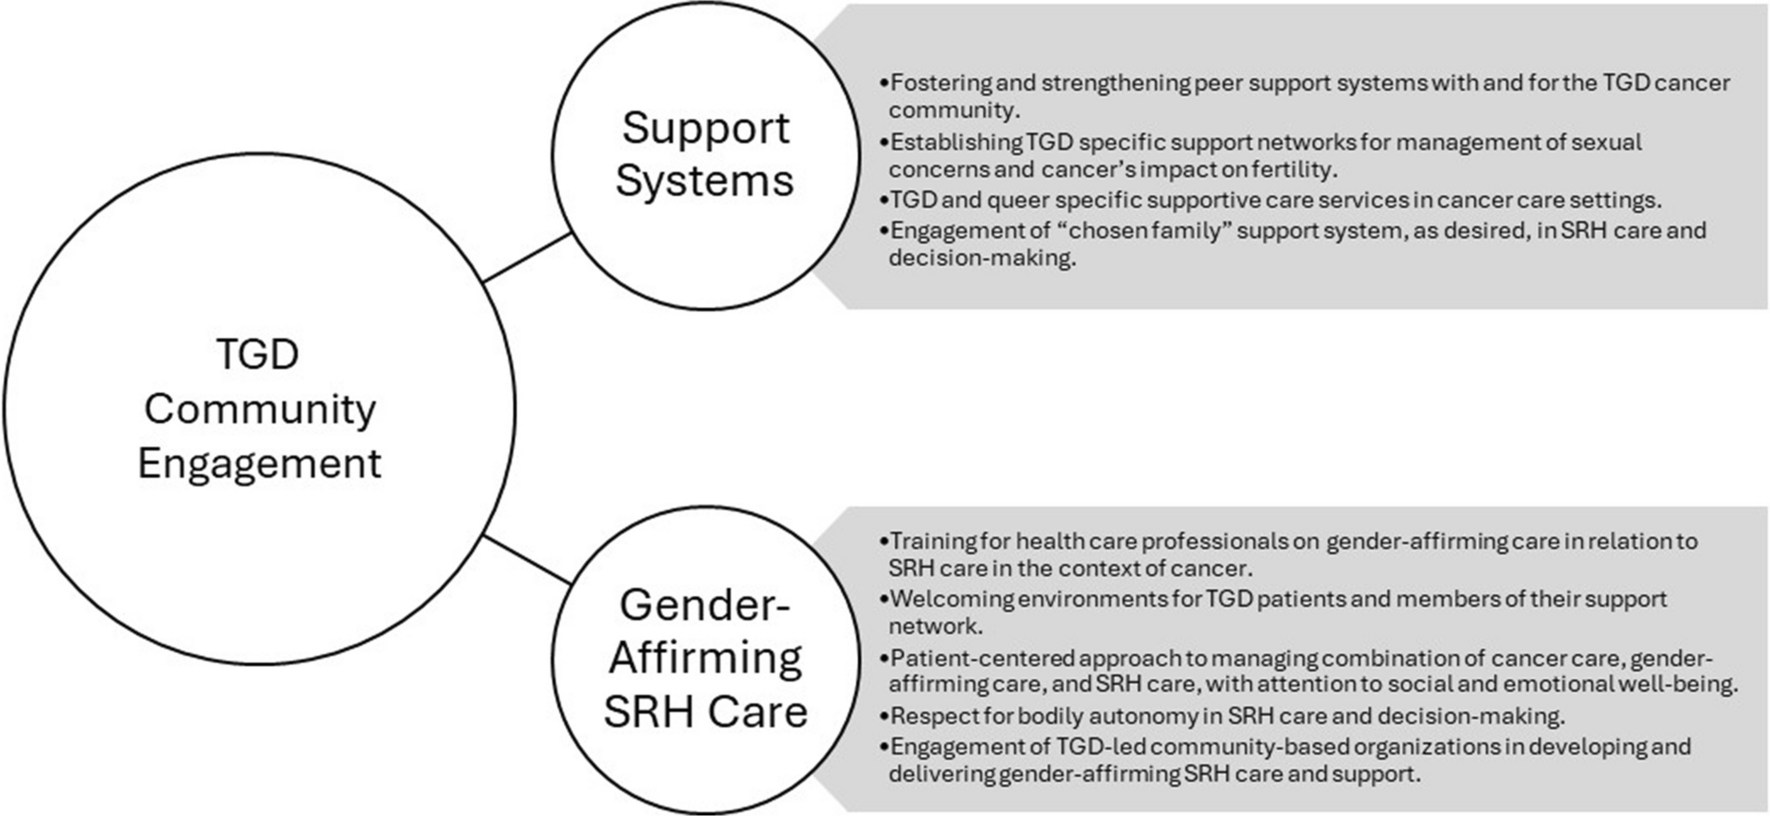 “Just for pregnant women, not for you”: a qualitative evaluation of the sexual and reproductive healthcare experiences of transgender and gender diverse cancer survivors